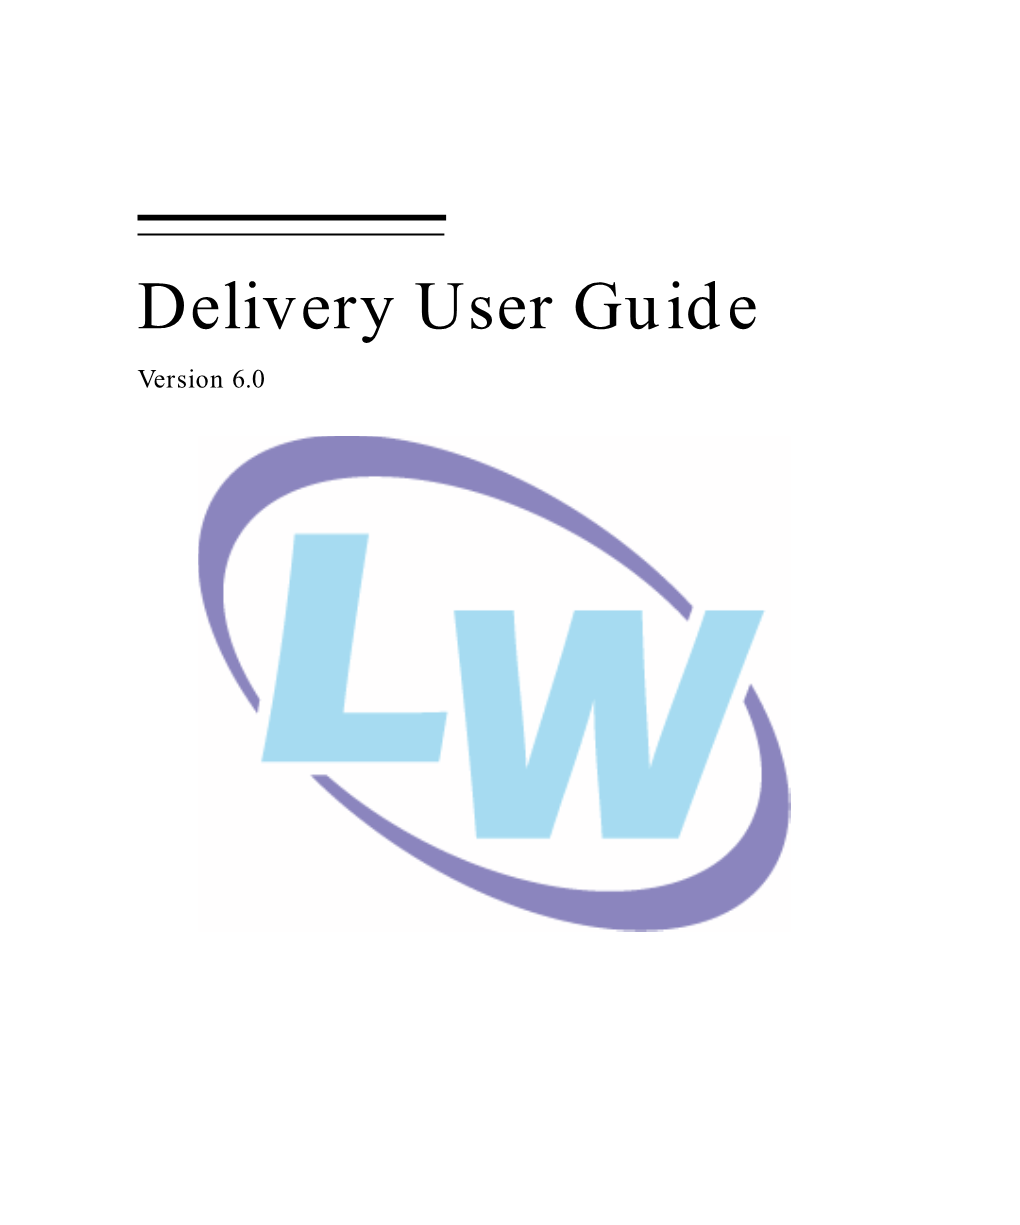 Delivery User Guide Version 6.0 Copyright and Trademarks Lispworks Delivery User Guide Version 6.0 November 2009 Copyright © 2009 by Lispworks Ltd